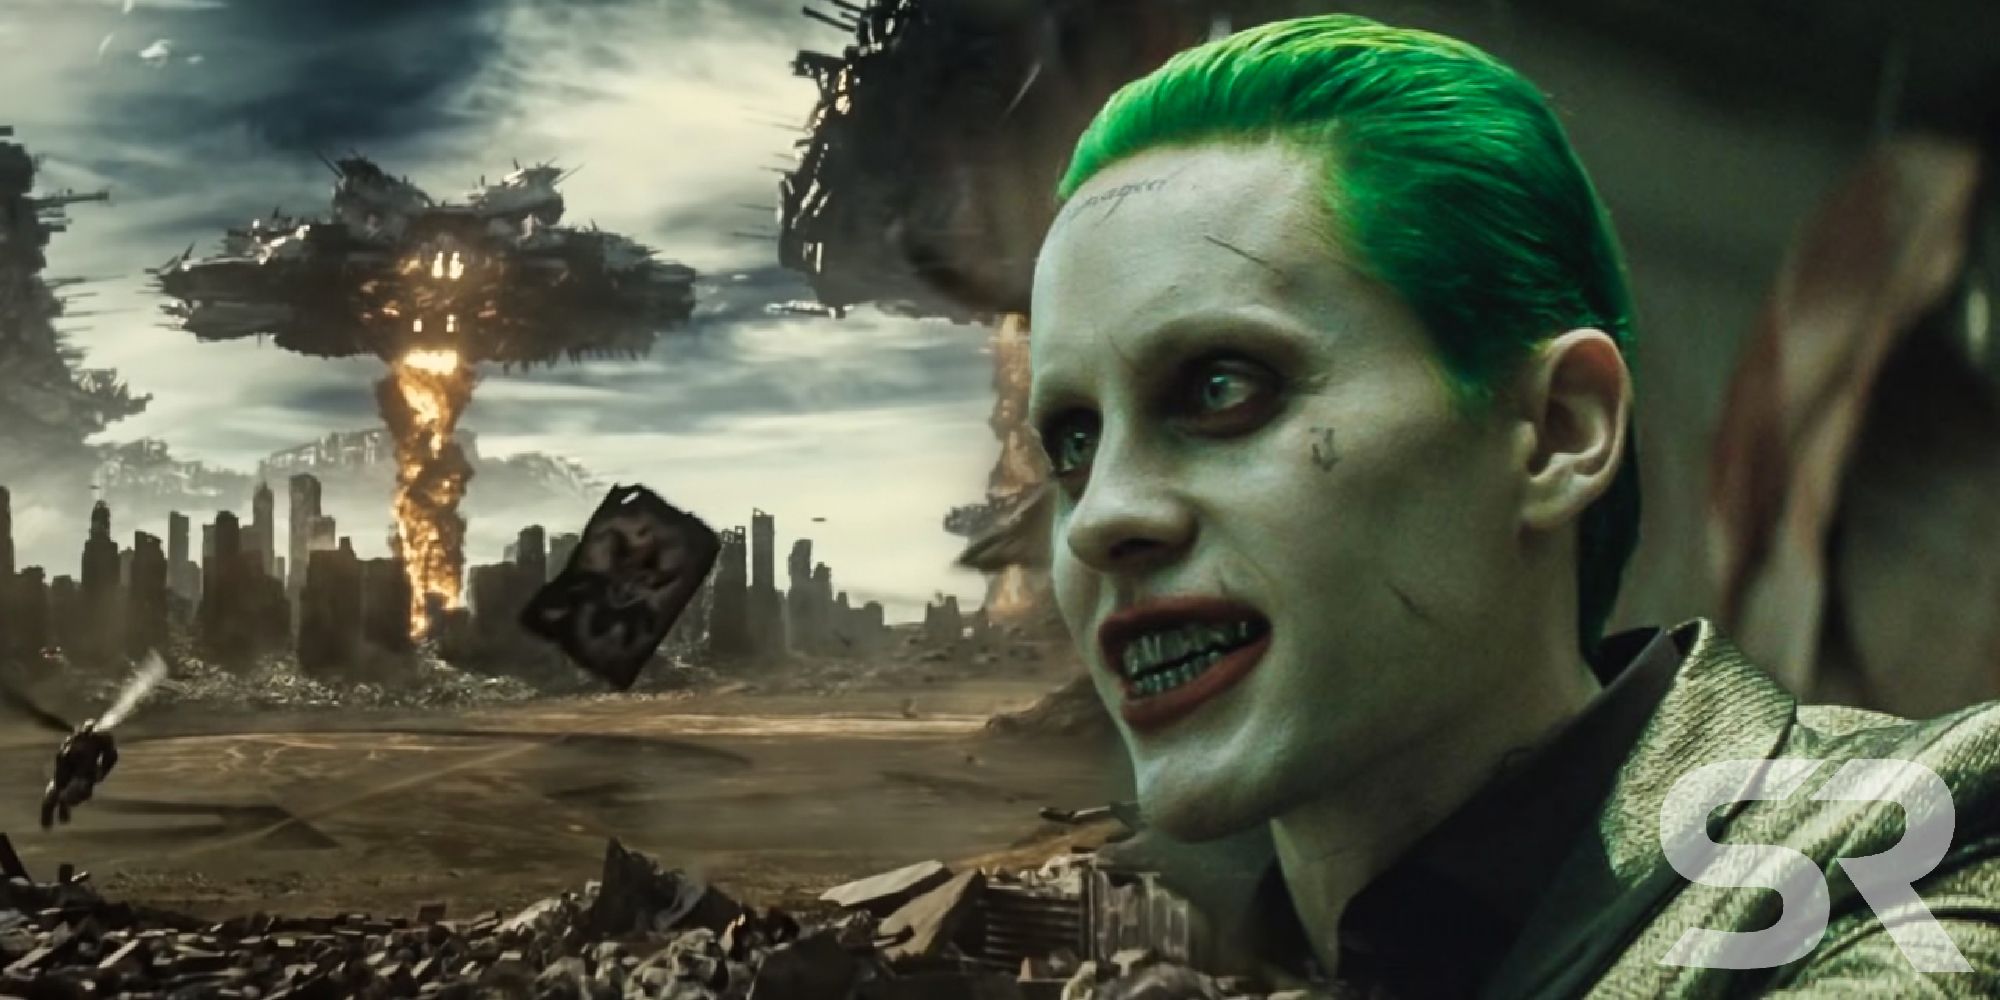 Jared Leto as Joker in Suicide Squad and Knightmare scene Snyder Cut